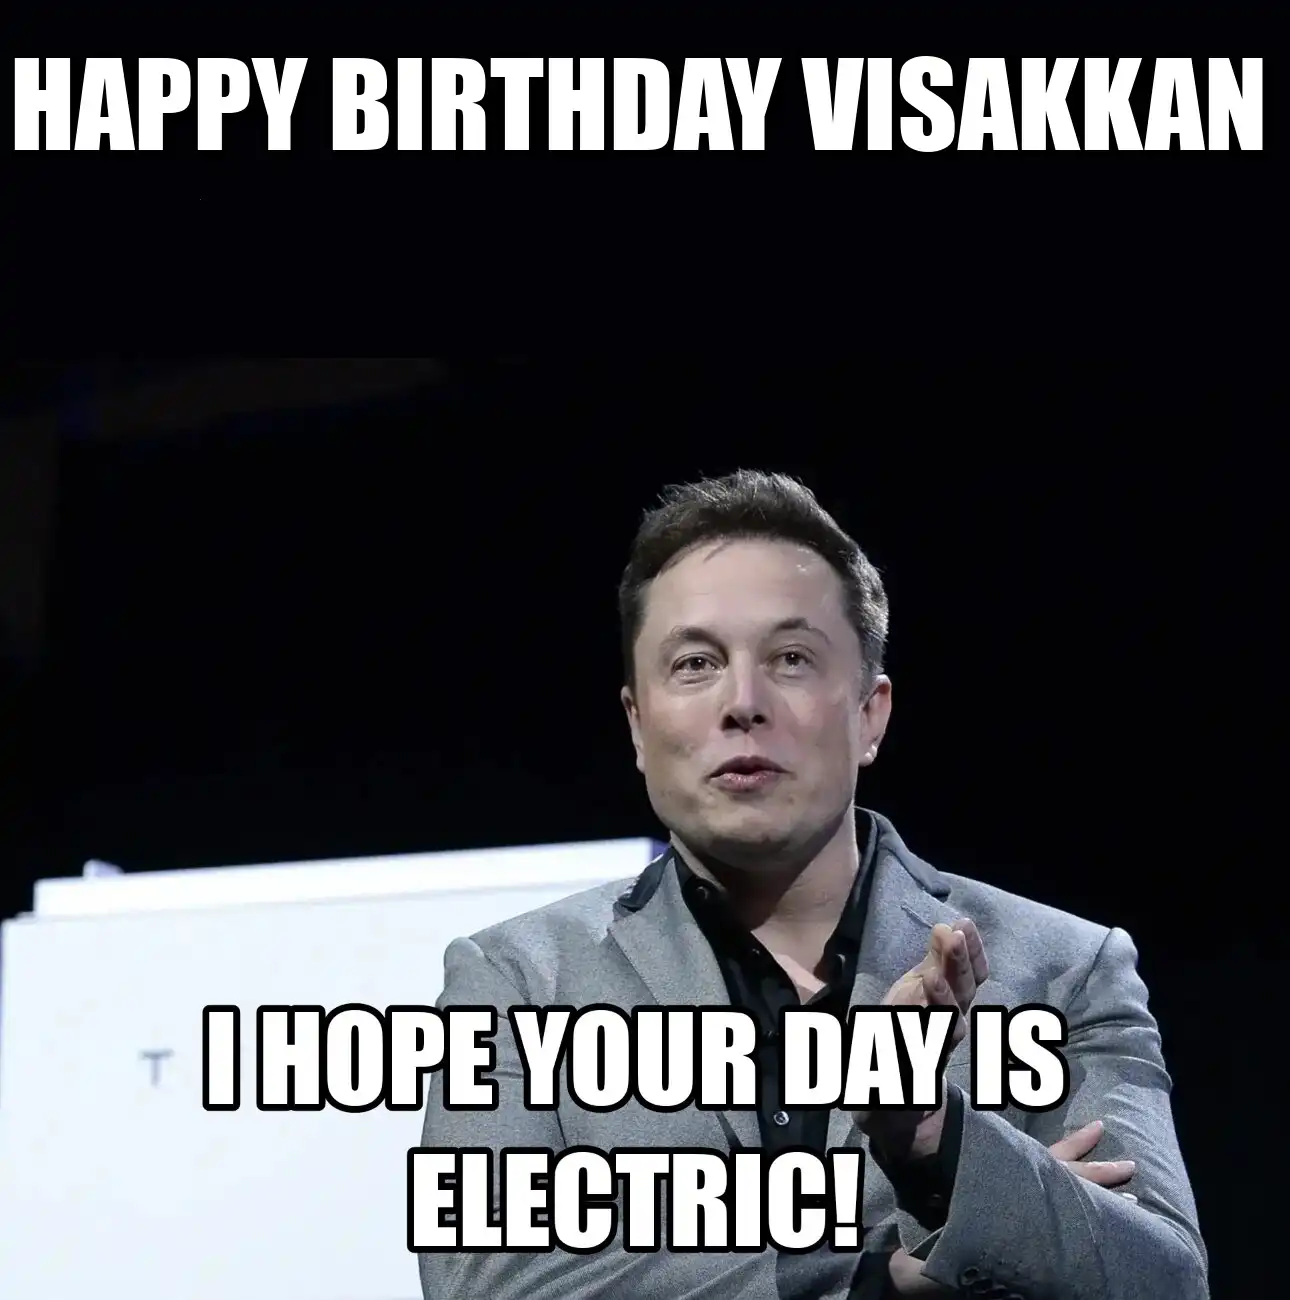 Happy Birthday Visakkan I Hope Your Day Is Electric Meme